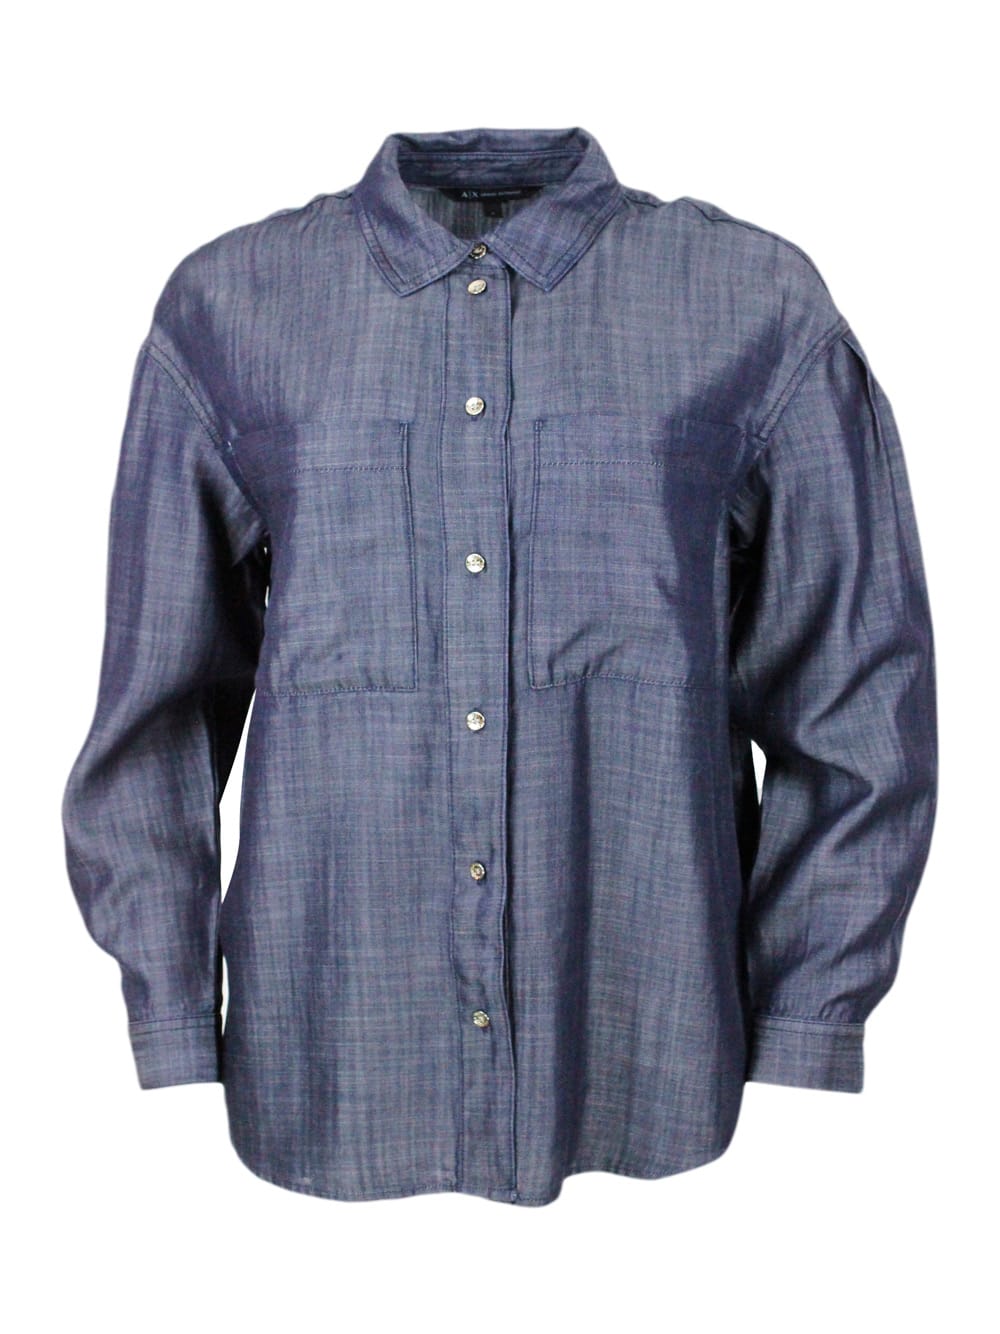 Lightweight Long-sleeved Denim Shirt With Chest Pockets And Button Closure